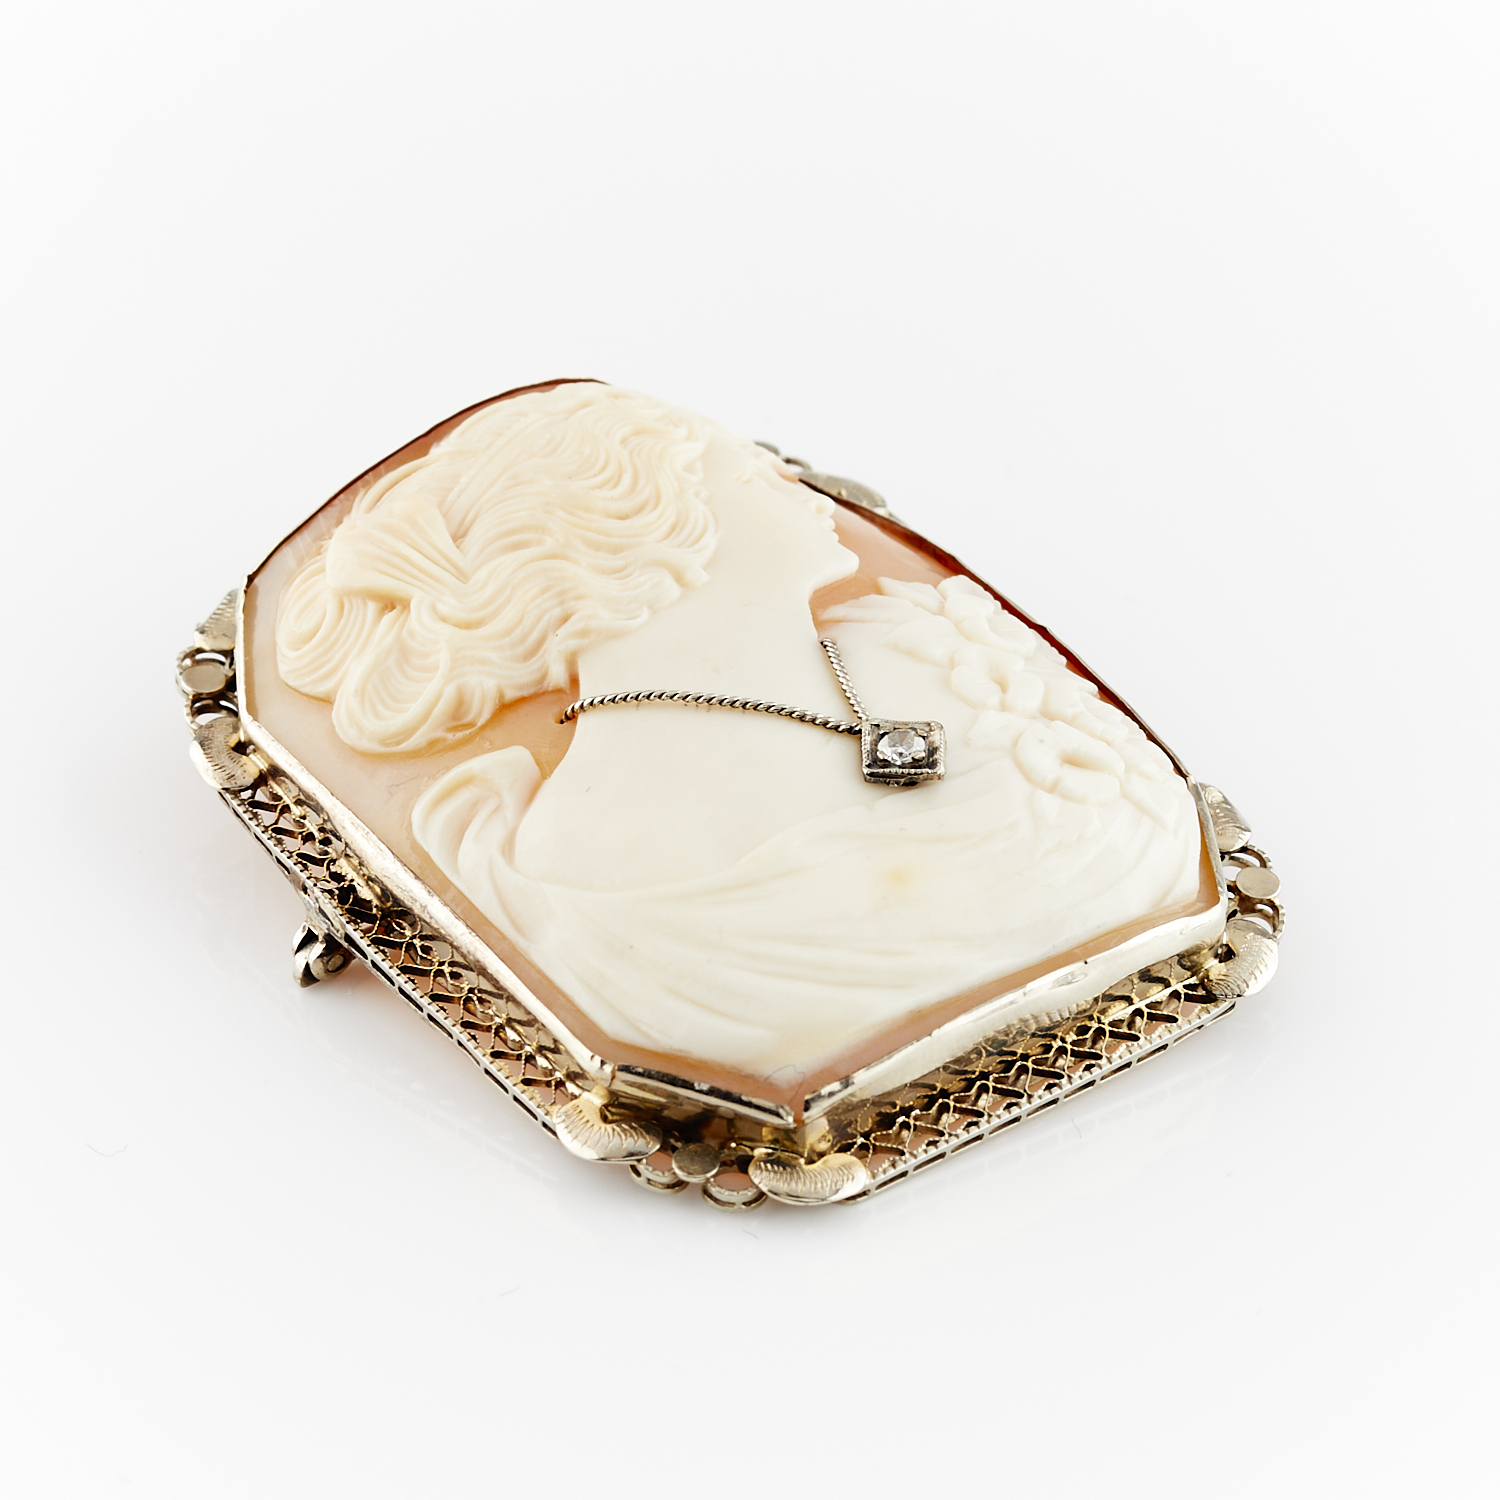 14k White Gold Cameo Habille Brooch w/ Diamond - Image 5 of 8